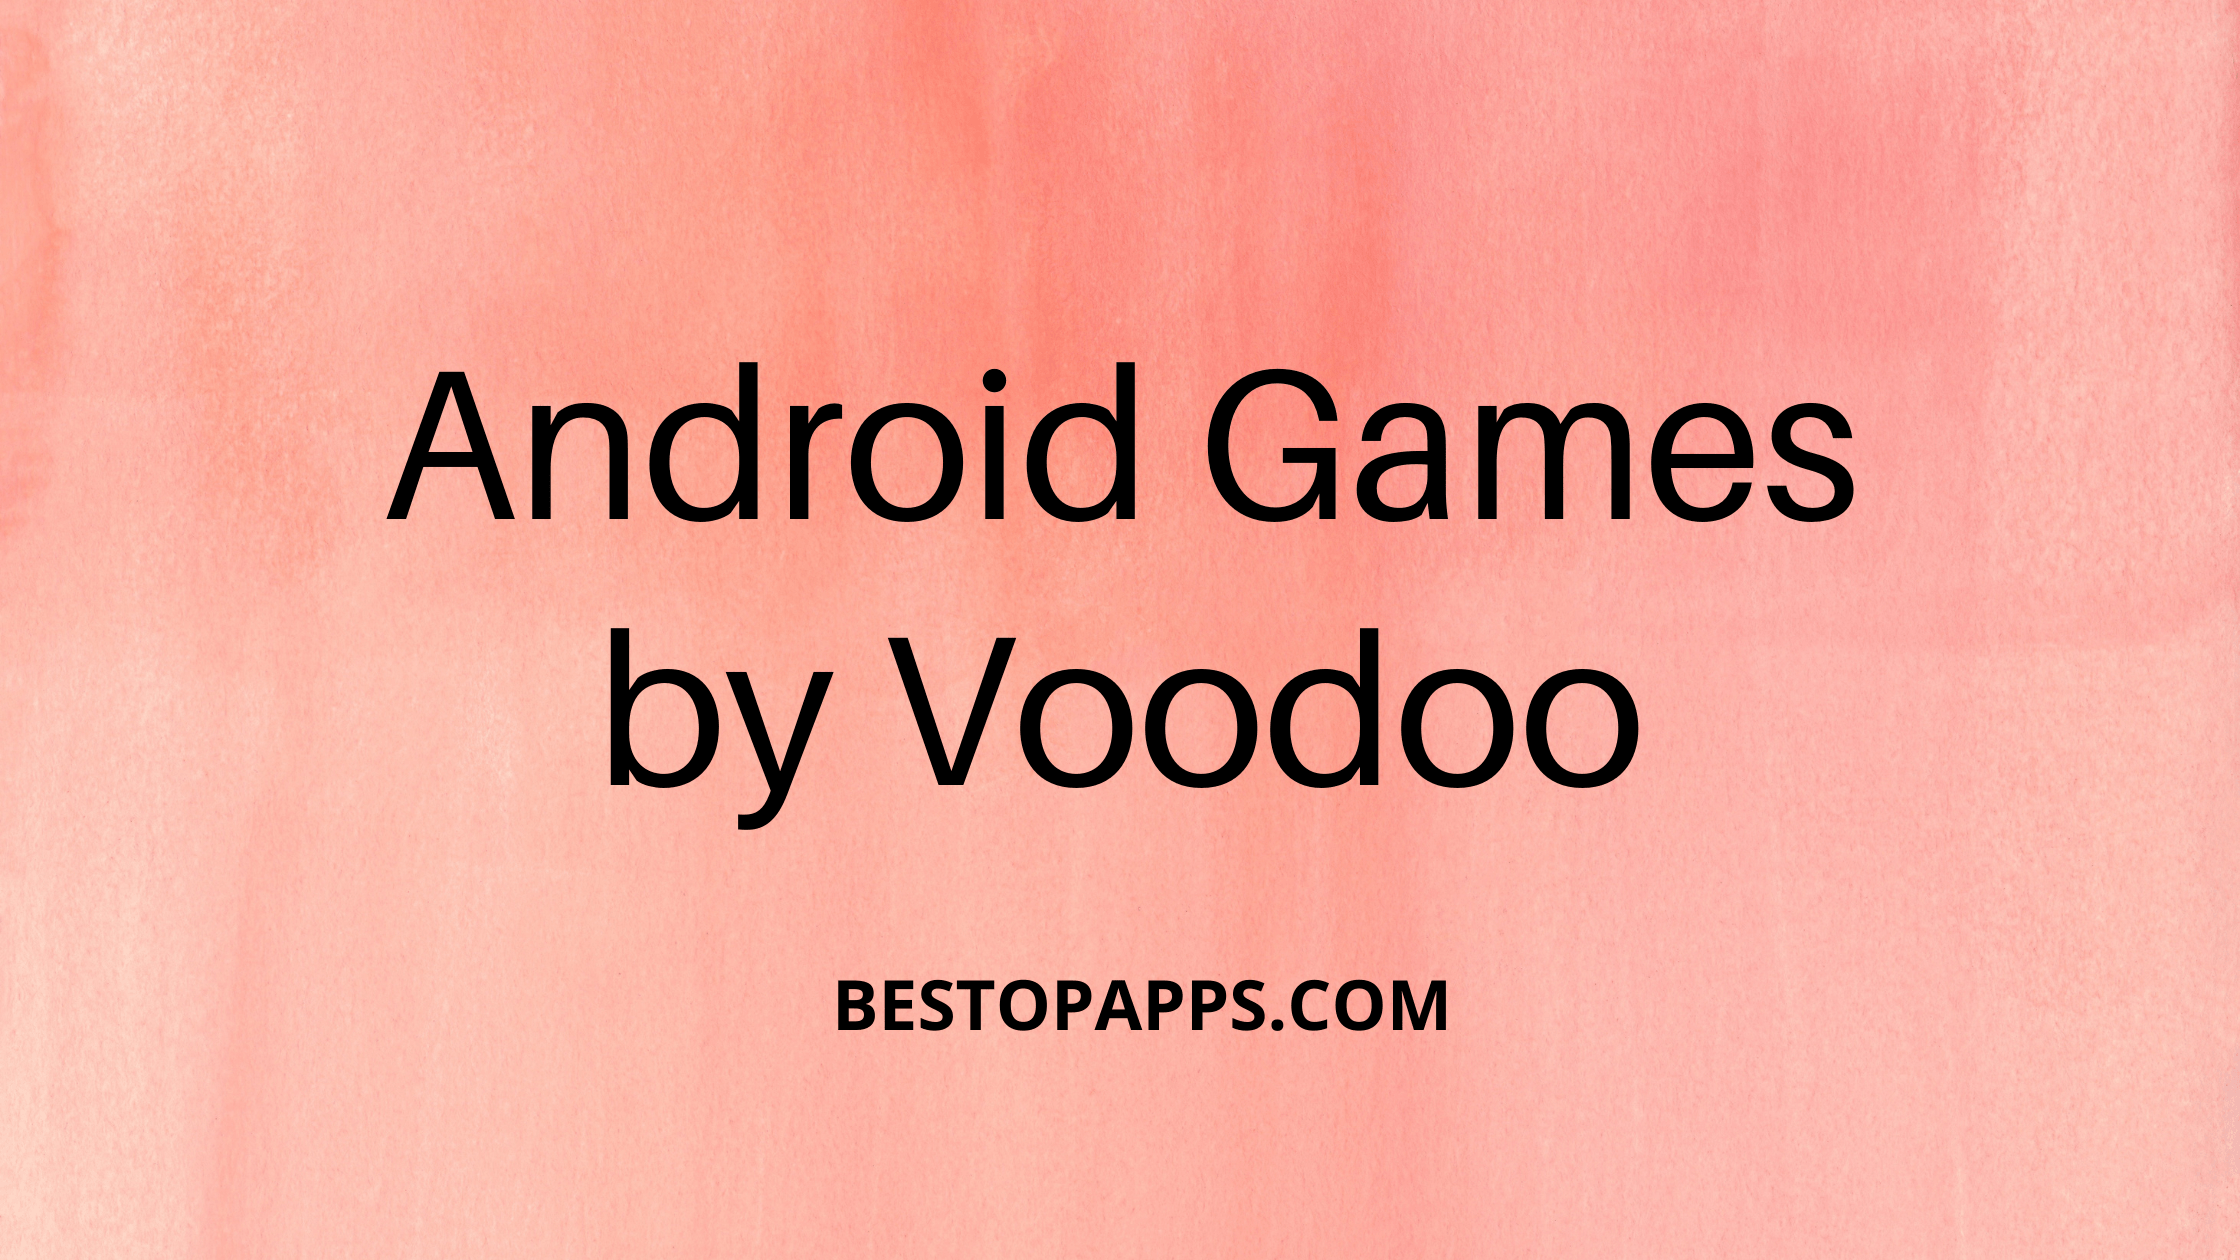 Android Games by Voodoo